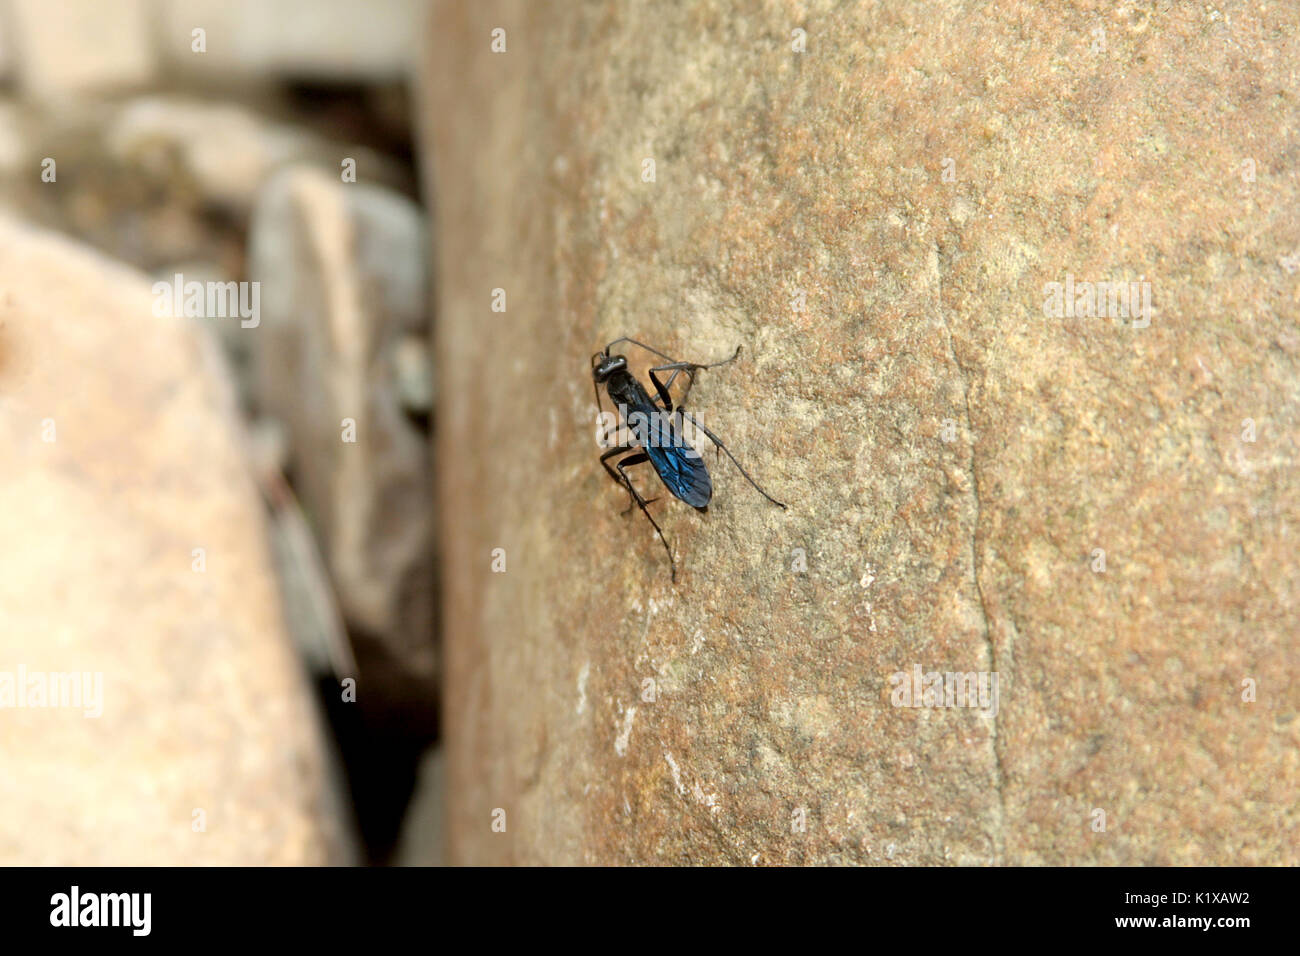 Blue Pottery Wasp Blue Mud Dauber Stock Photo - Download Image Now - iStock